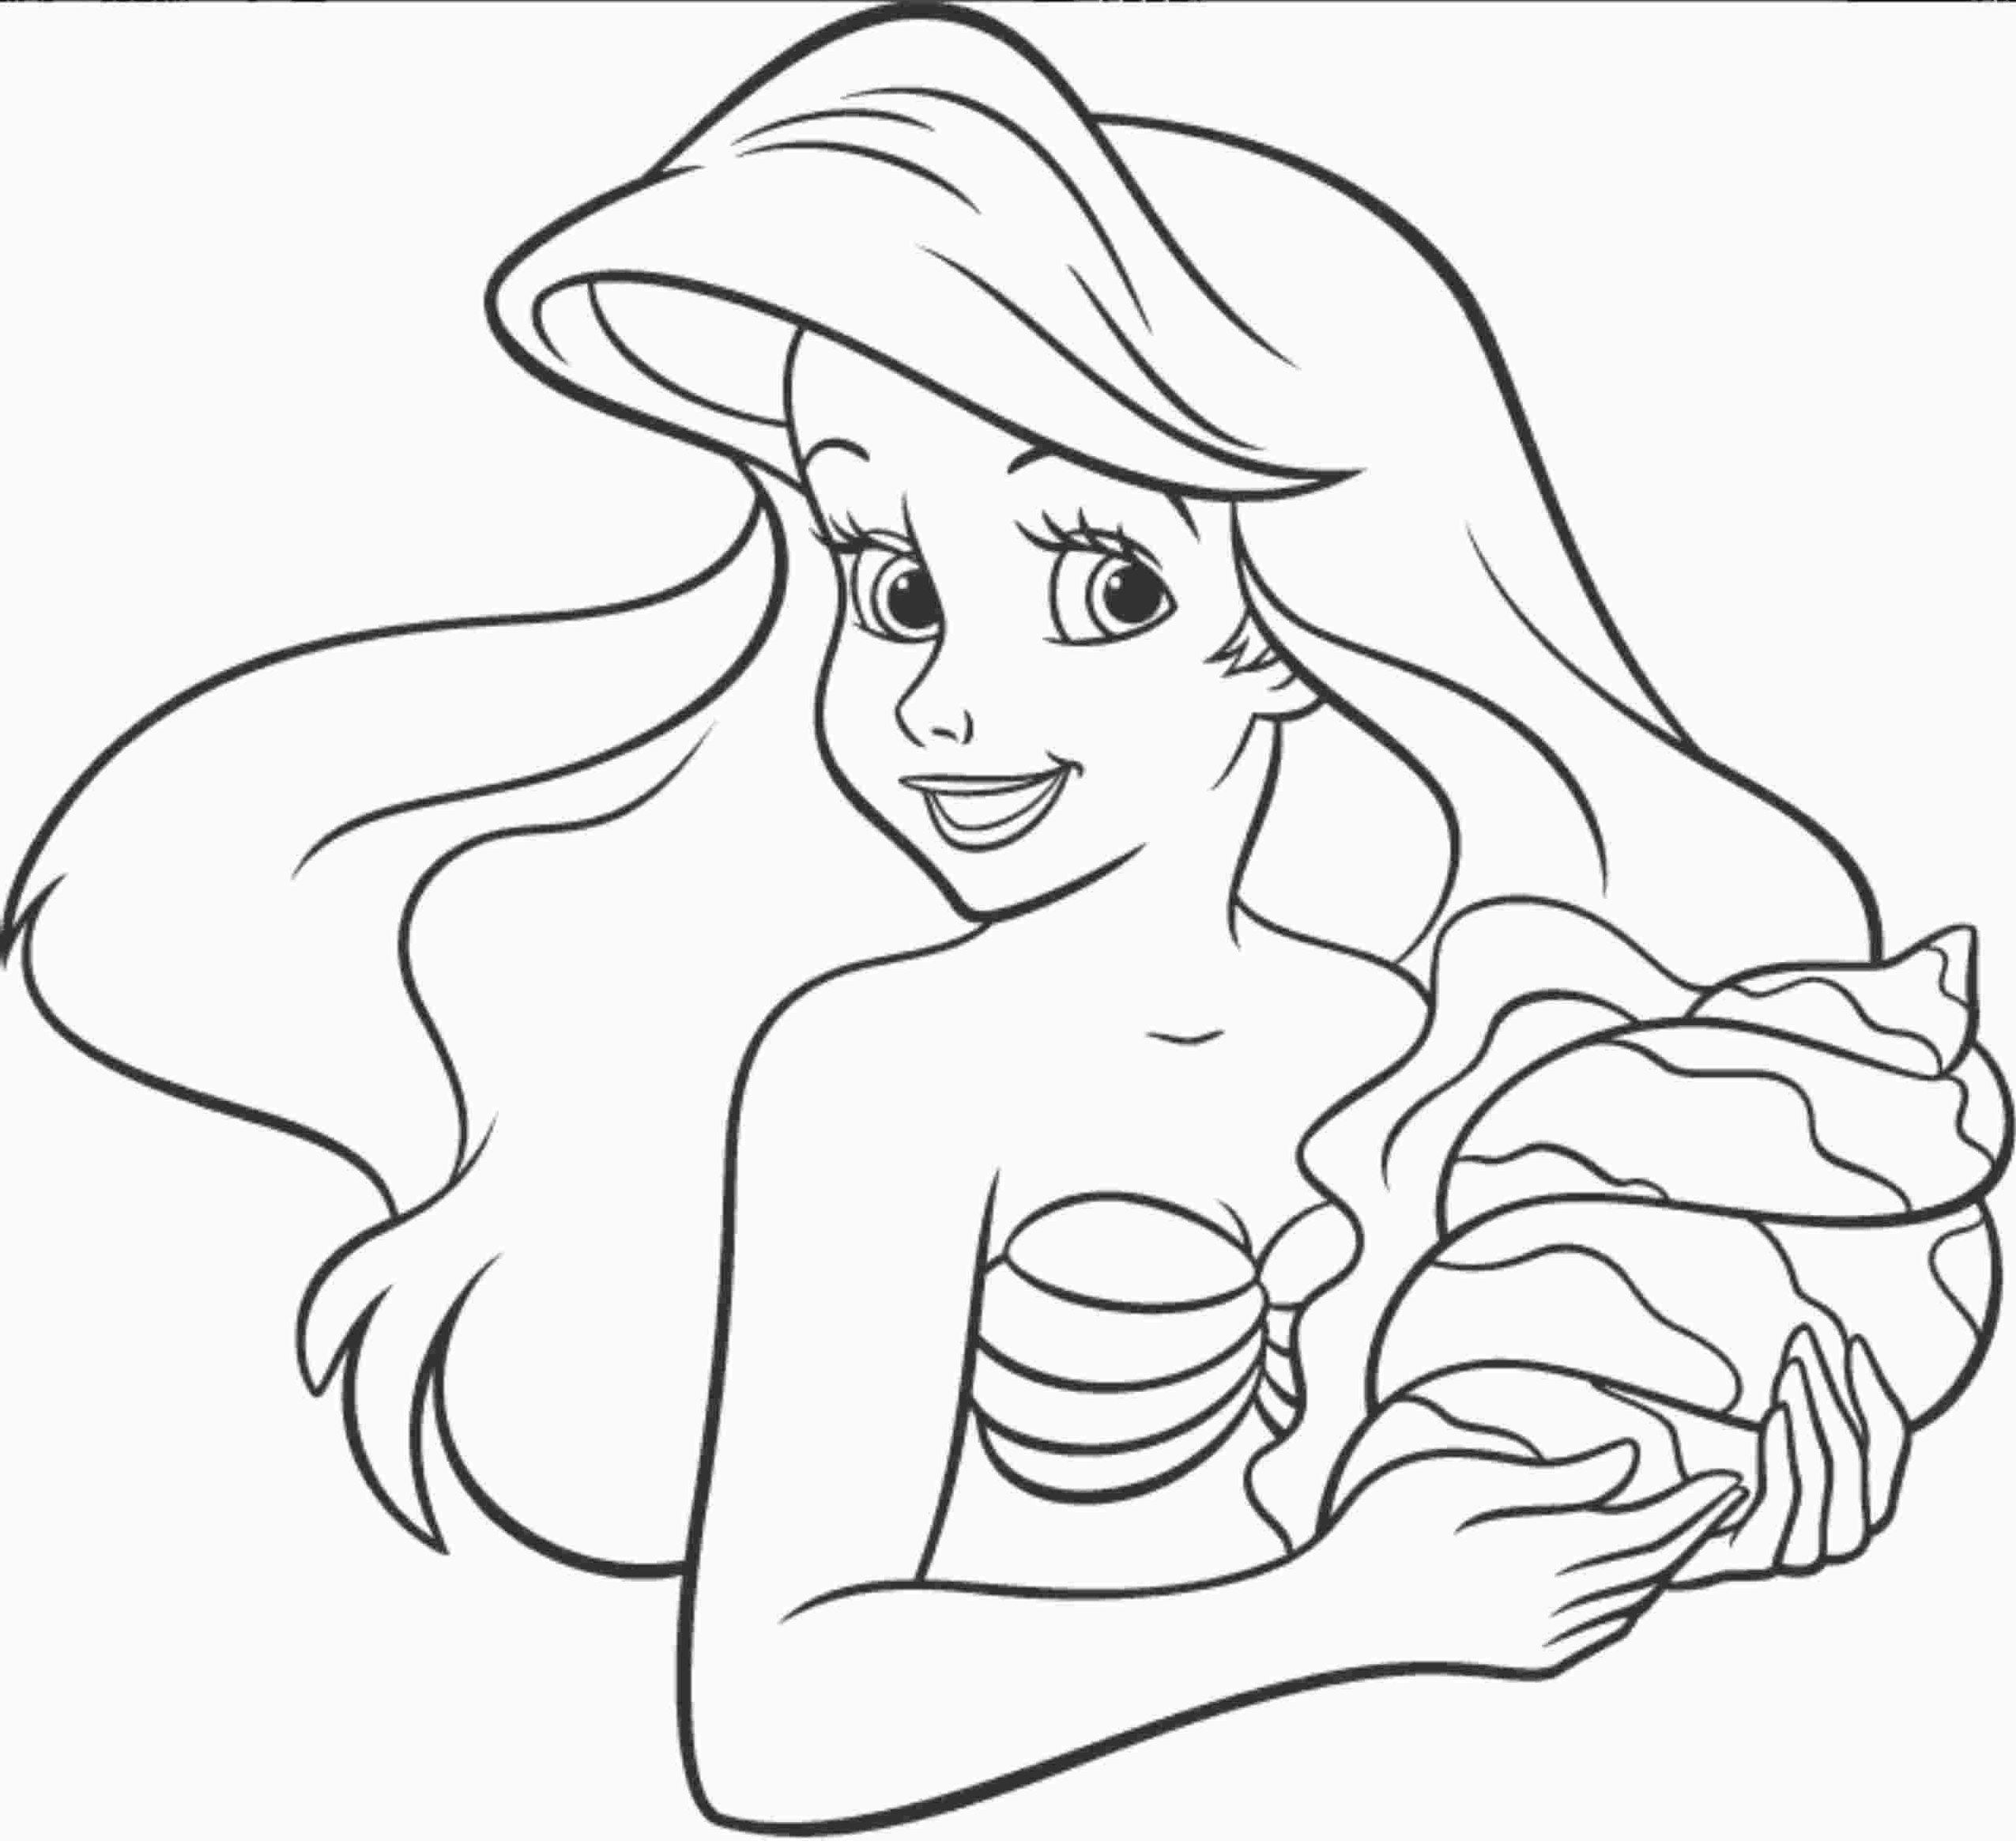 King Triton Coloring Pages at GetColorings.com | Free ...